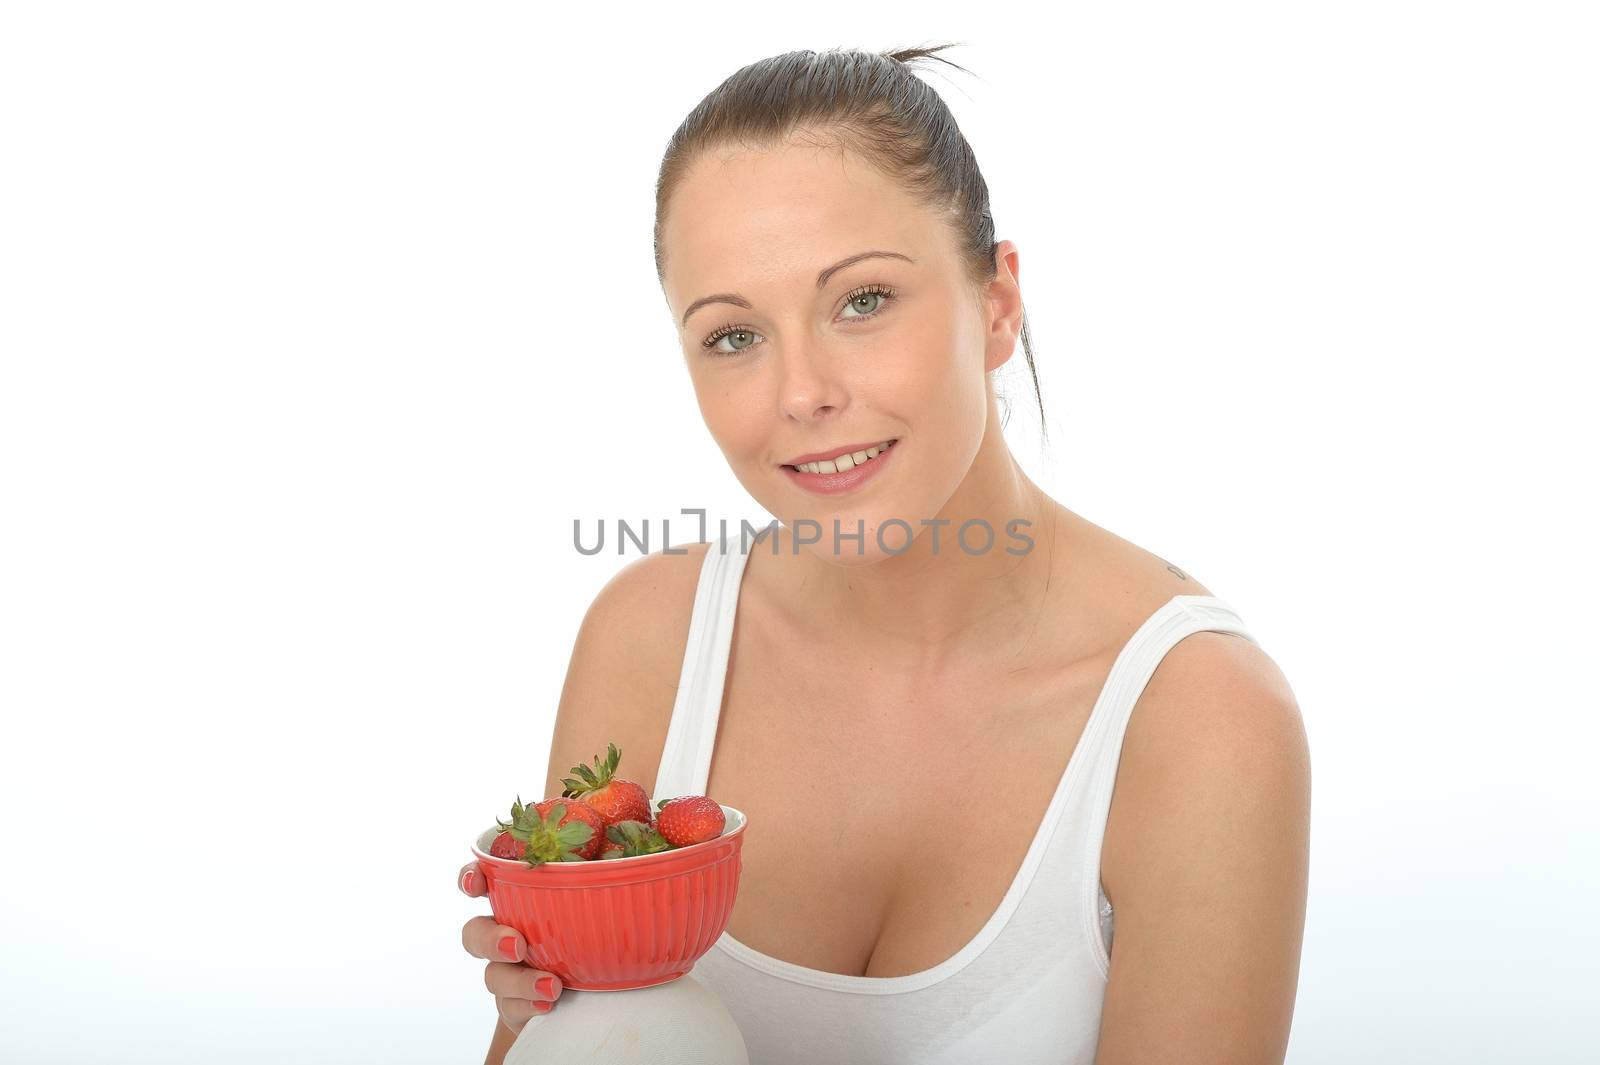 Healthy Fit Young Woman Holding a Bowl of Fresh Ripe Juicy Straw by Whiteboxmedia